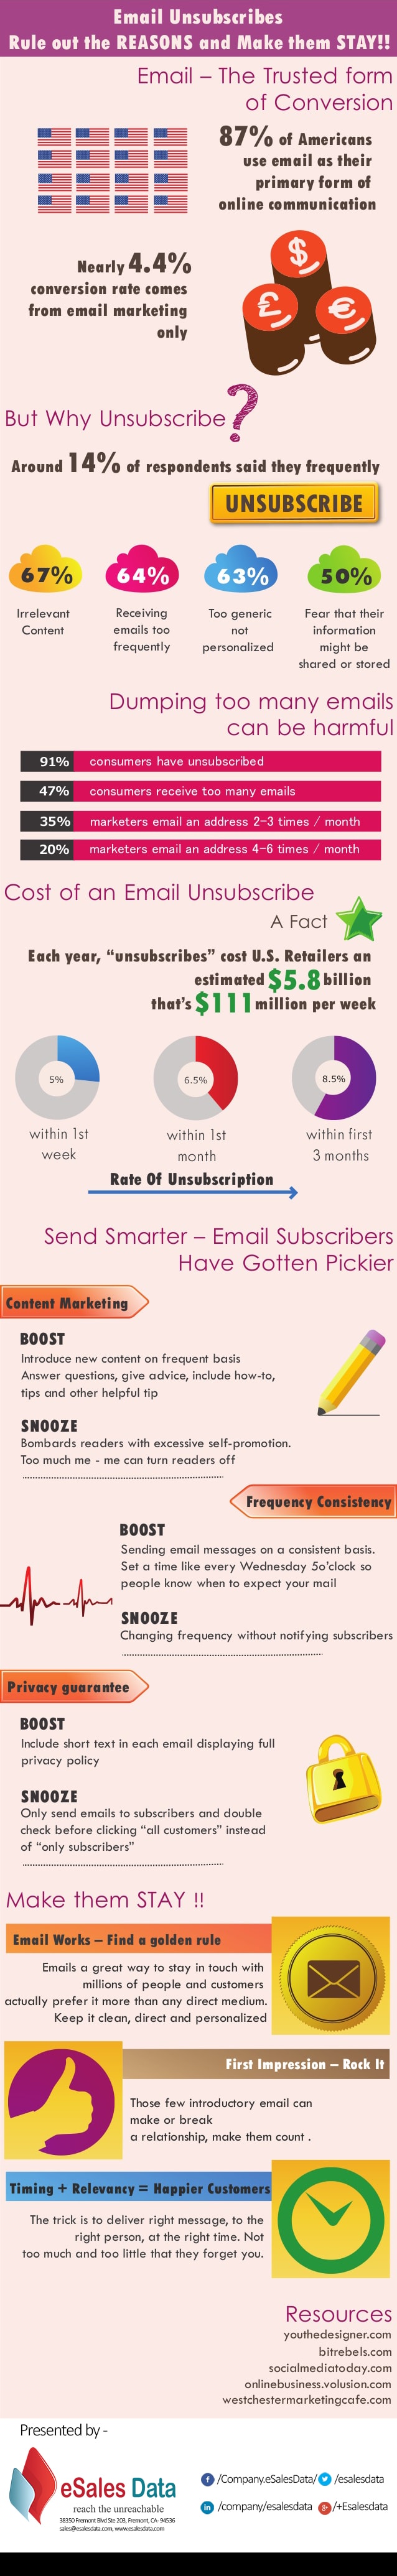 Email Unsubscribers